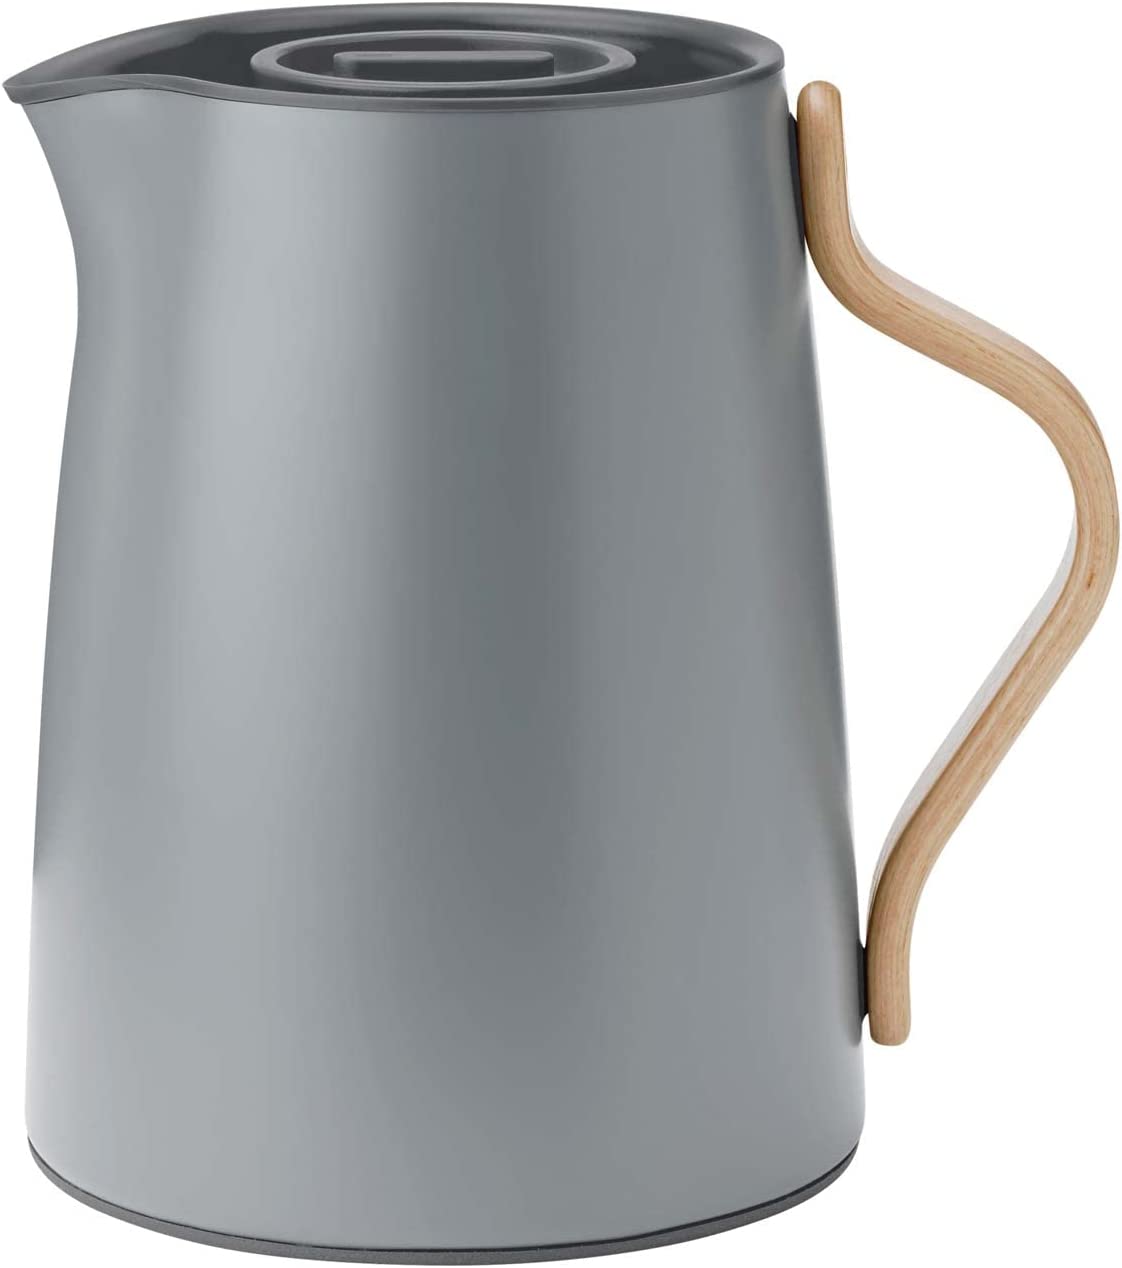 Stelton Emma Tea Insulated Jug - Insulated Plastic Teapot with Lid & Stainless Steel Thermal Insert - Modern Design, Clever Integrated Infusion Filter & Beech Wood Handle - 1 Litre, Matt Grey